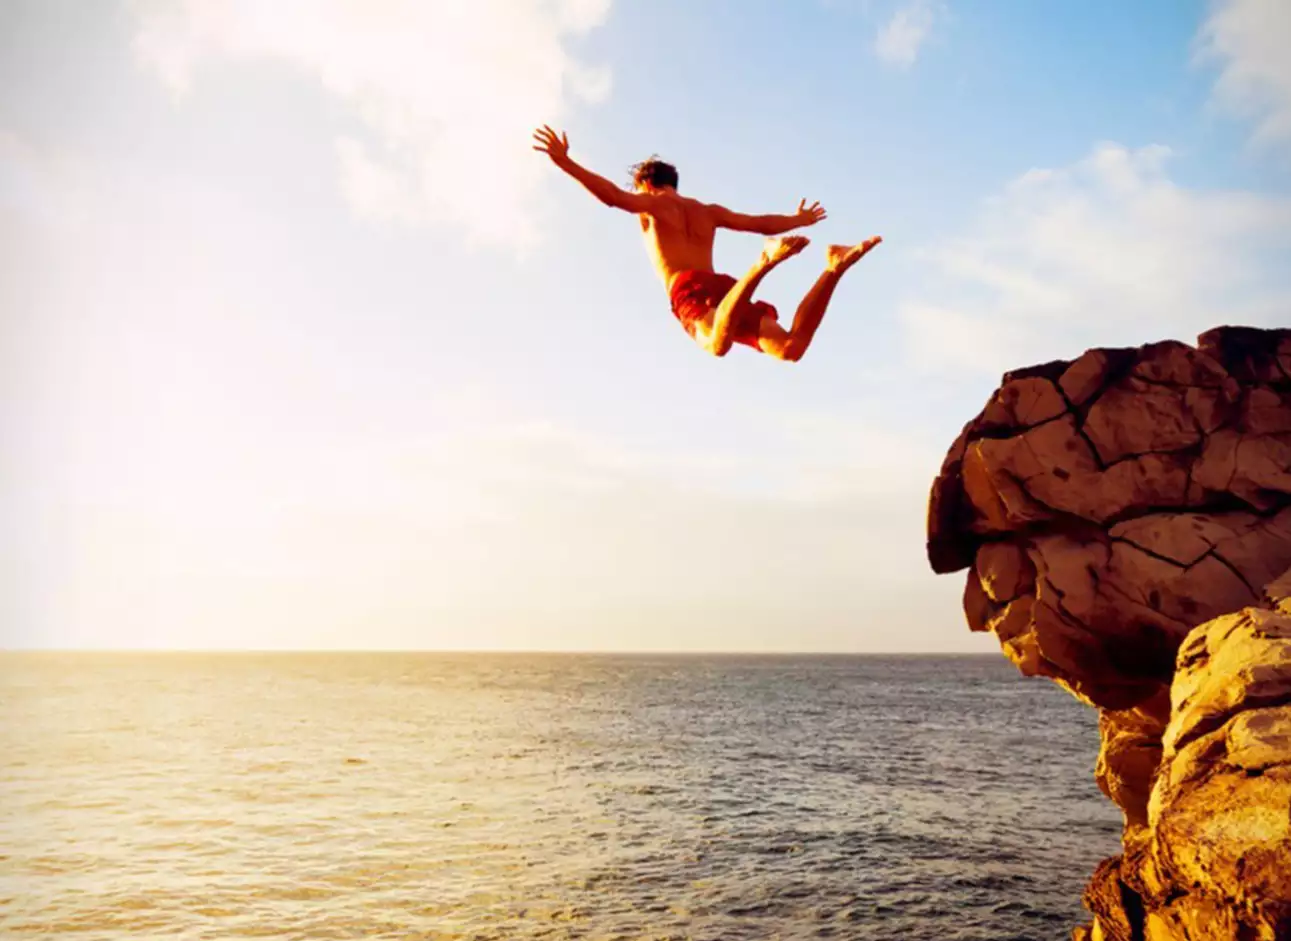 Cliff Jumping - Experience the thrill of jumping off cliffs into refreshing waters